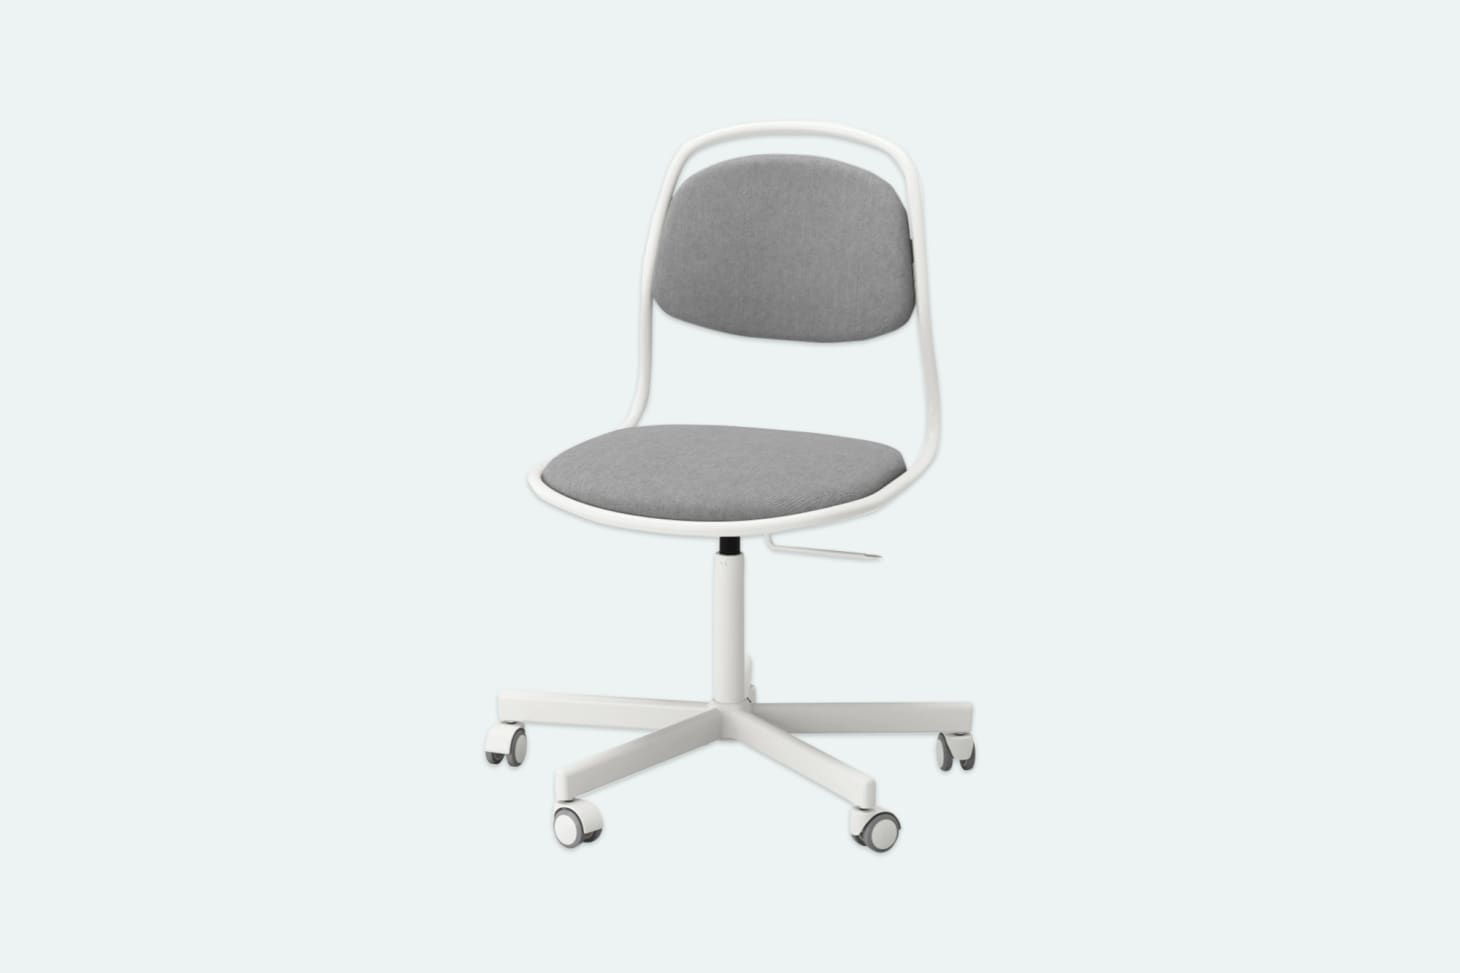 Best Office Chairs - Stylish & Ergonomic Desk Chairs | Apartment Therapy